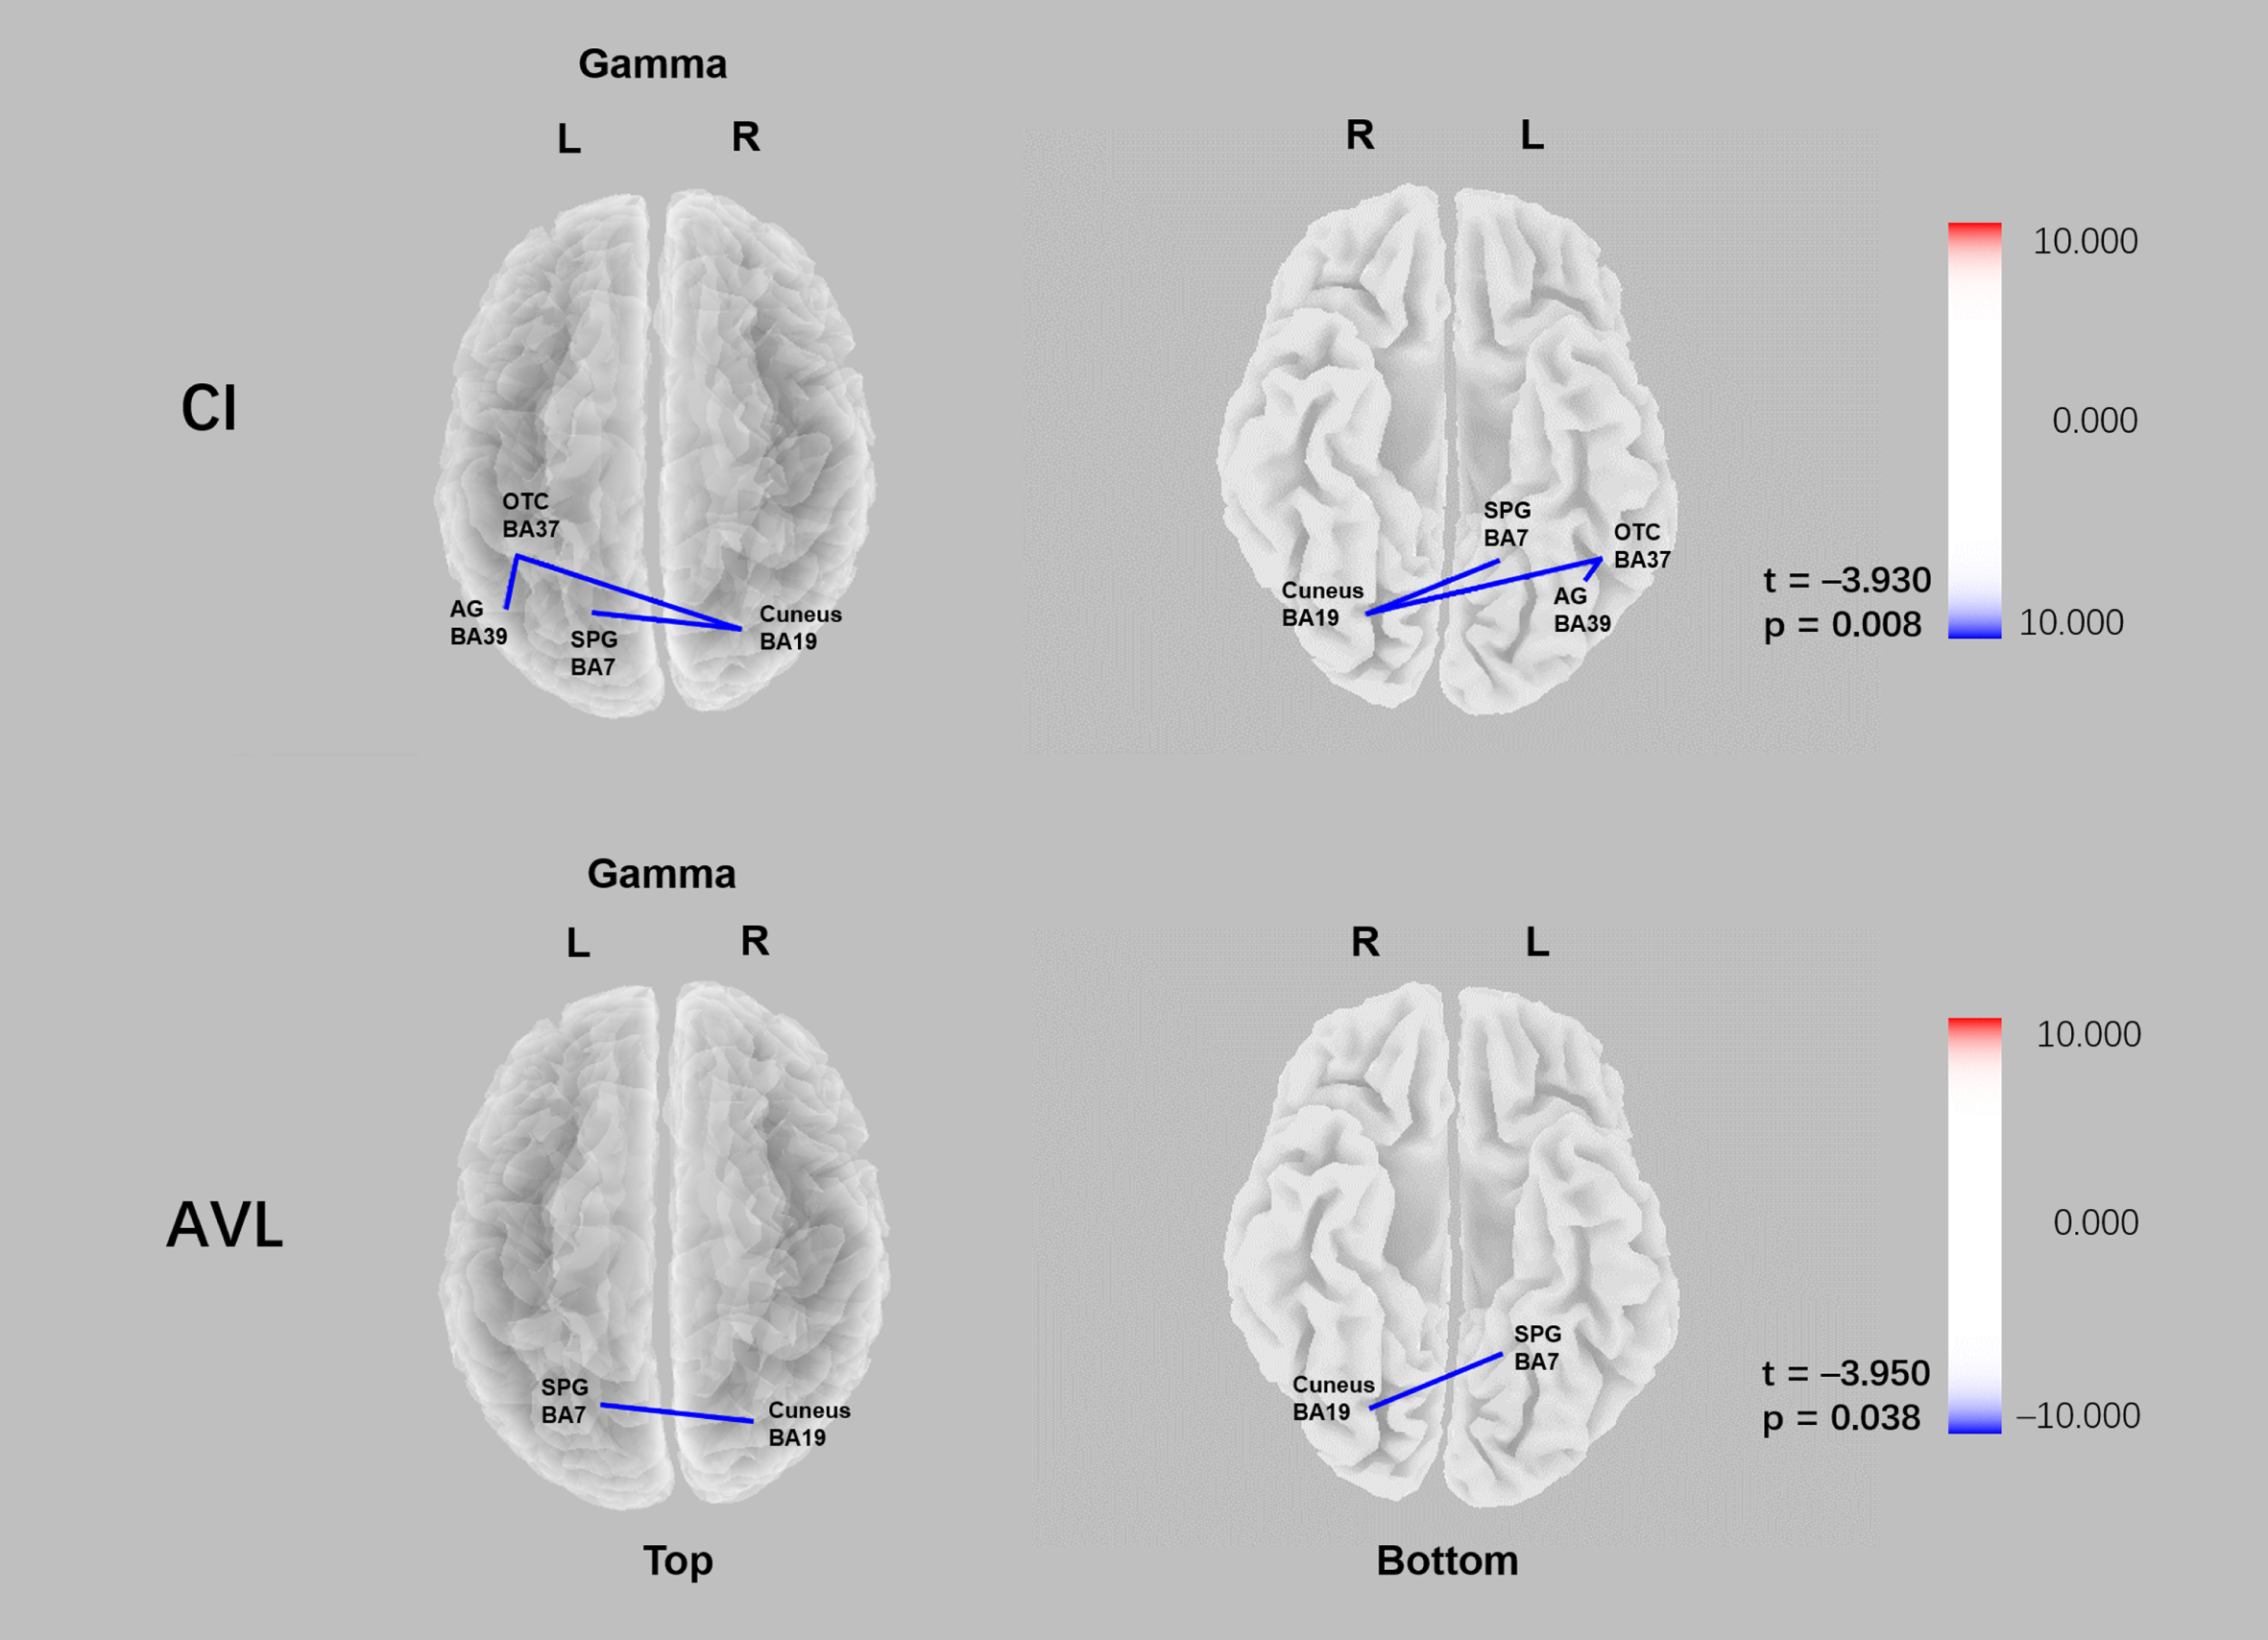 Comparison of functional connectivity of the CI and AVL groups relative to HC group in sLORETA source space. Lower gamma linear connectivity between the right cuneus (BA19) and the left superior parietal gyrus (BA7) was observed in both CI group and AVL groups relative to the HC group (pCI = 0.008; pAVL = 0.038).